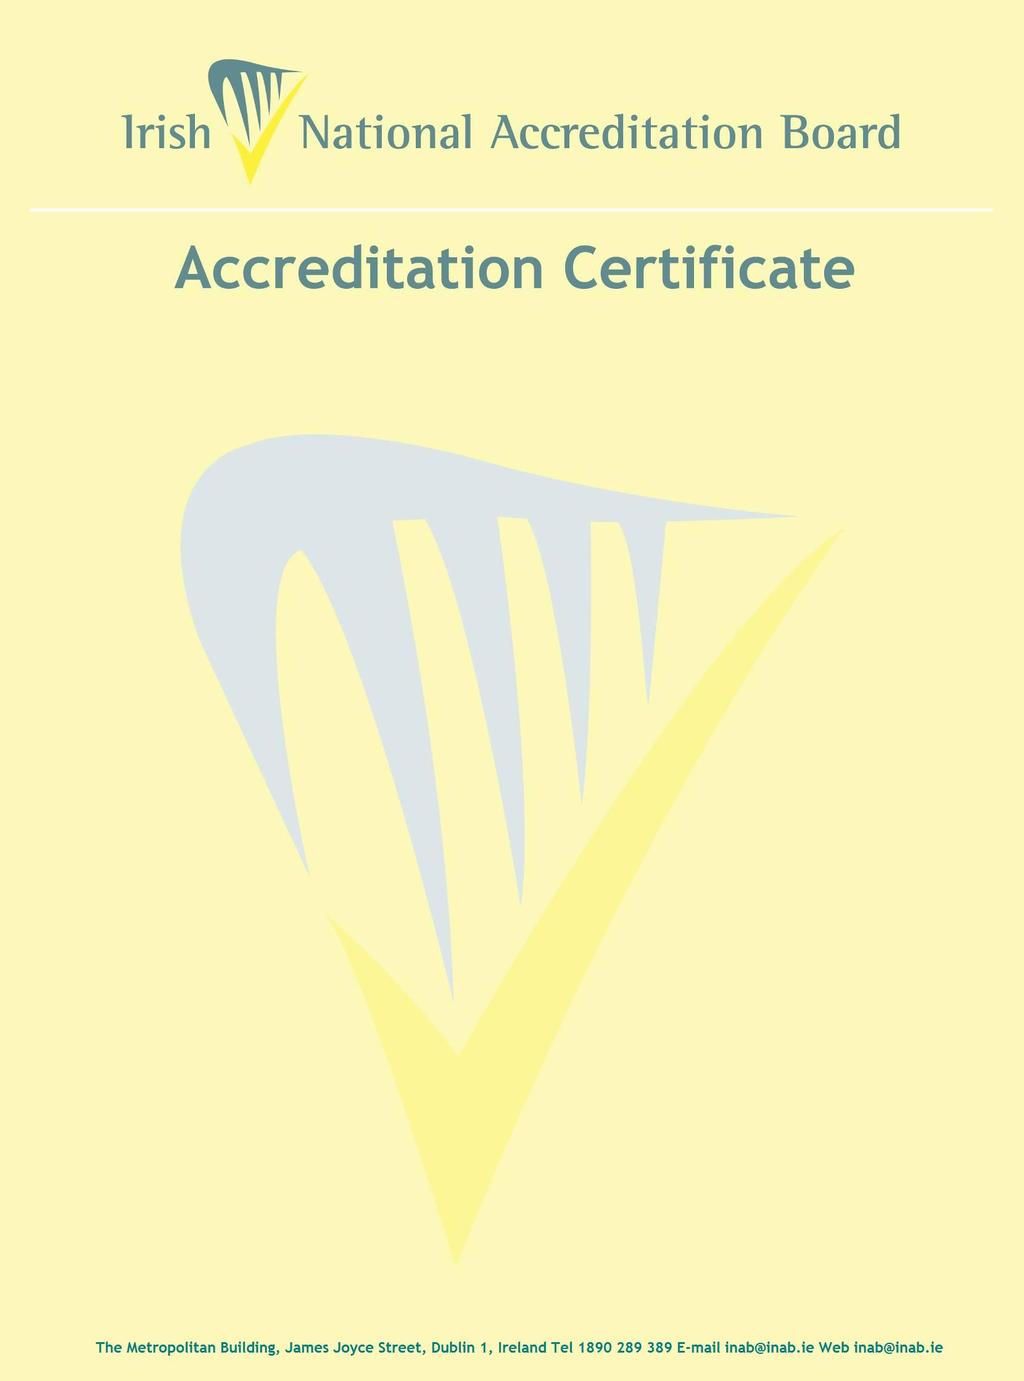 15 Greenmount House, Greenmount Office Park, Harold's Cross, Dublin 6W Management Systems Certification Body Registration number: 5005 is accredited by the Irish National Board (INAB) to undertake